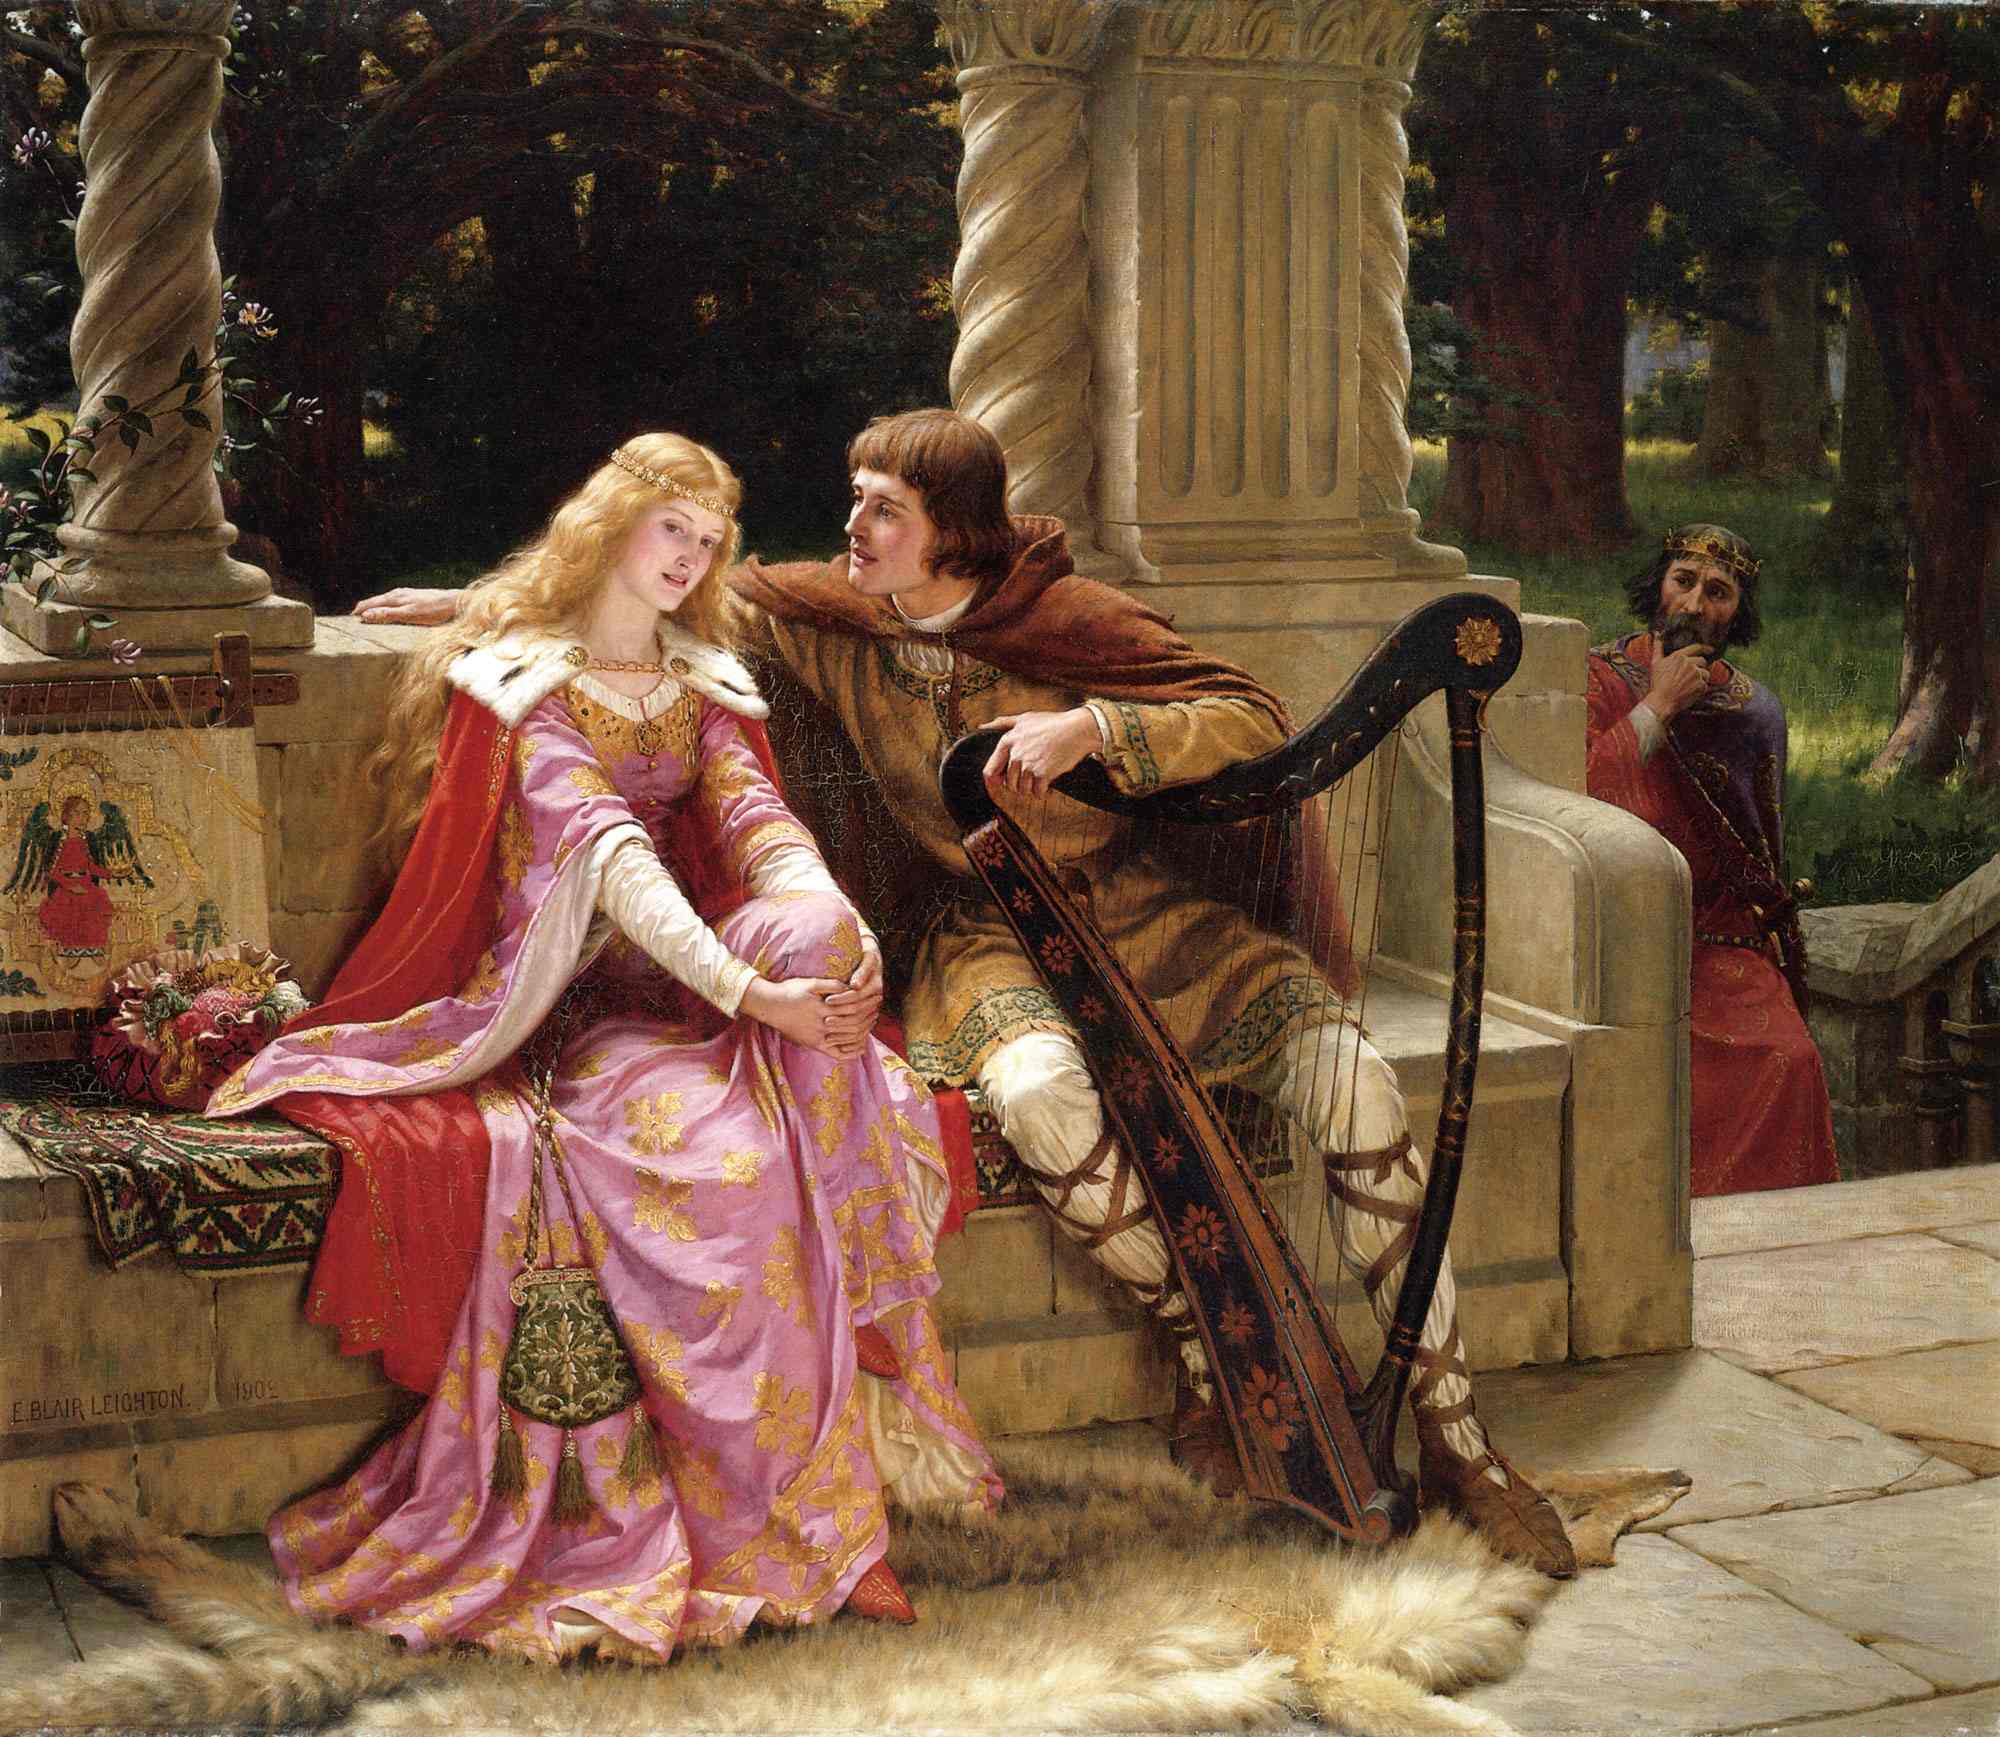 Tristan and Iseult. ‘The End of the Song’ by Edmund Leighton, 1902 ( Wikimedia Commons )